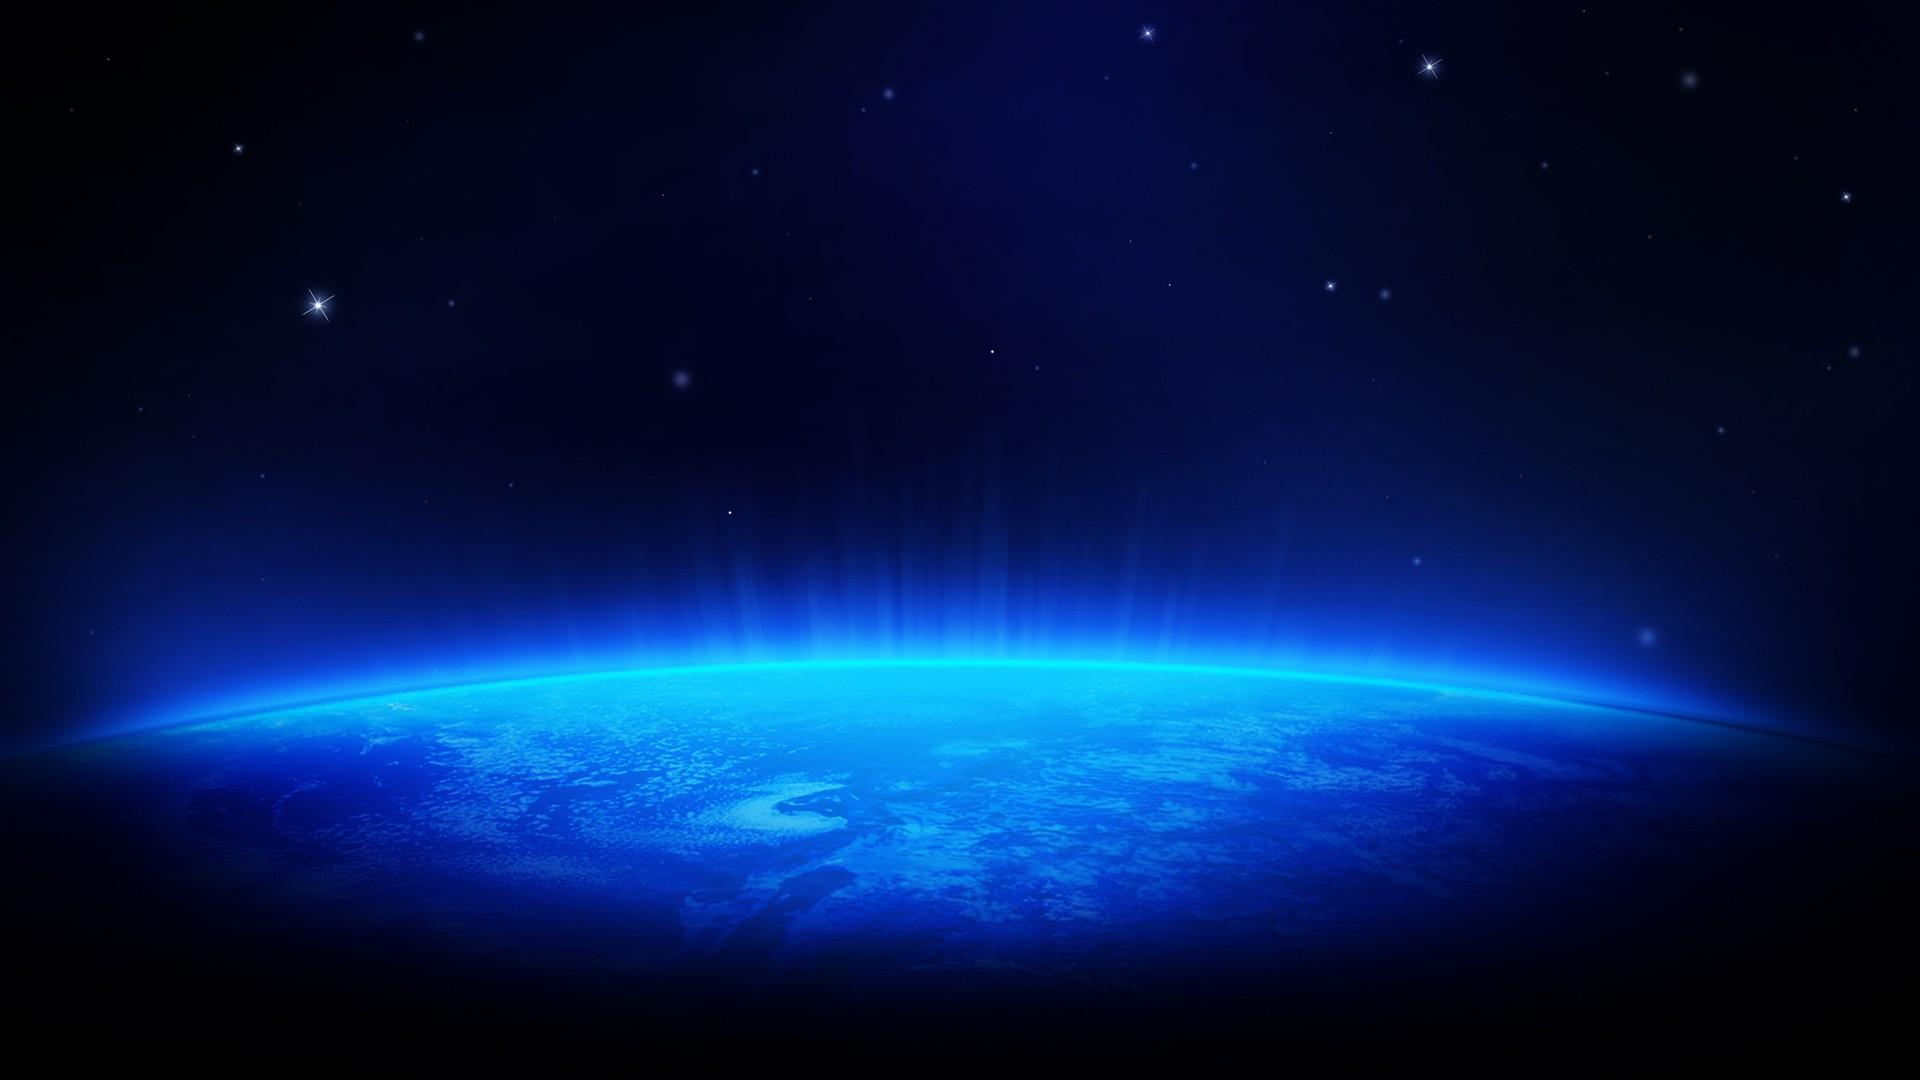 Black And Blue Space Wallpapers - Top Free Black And Blue Space